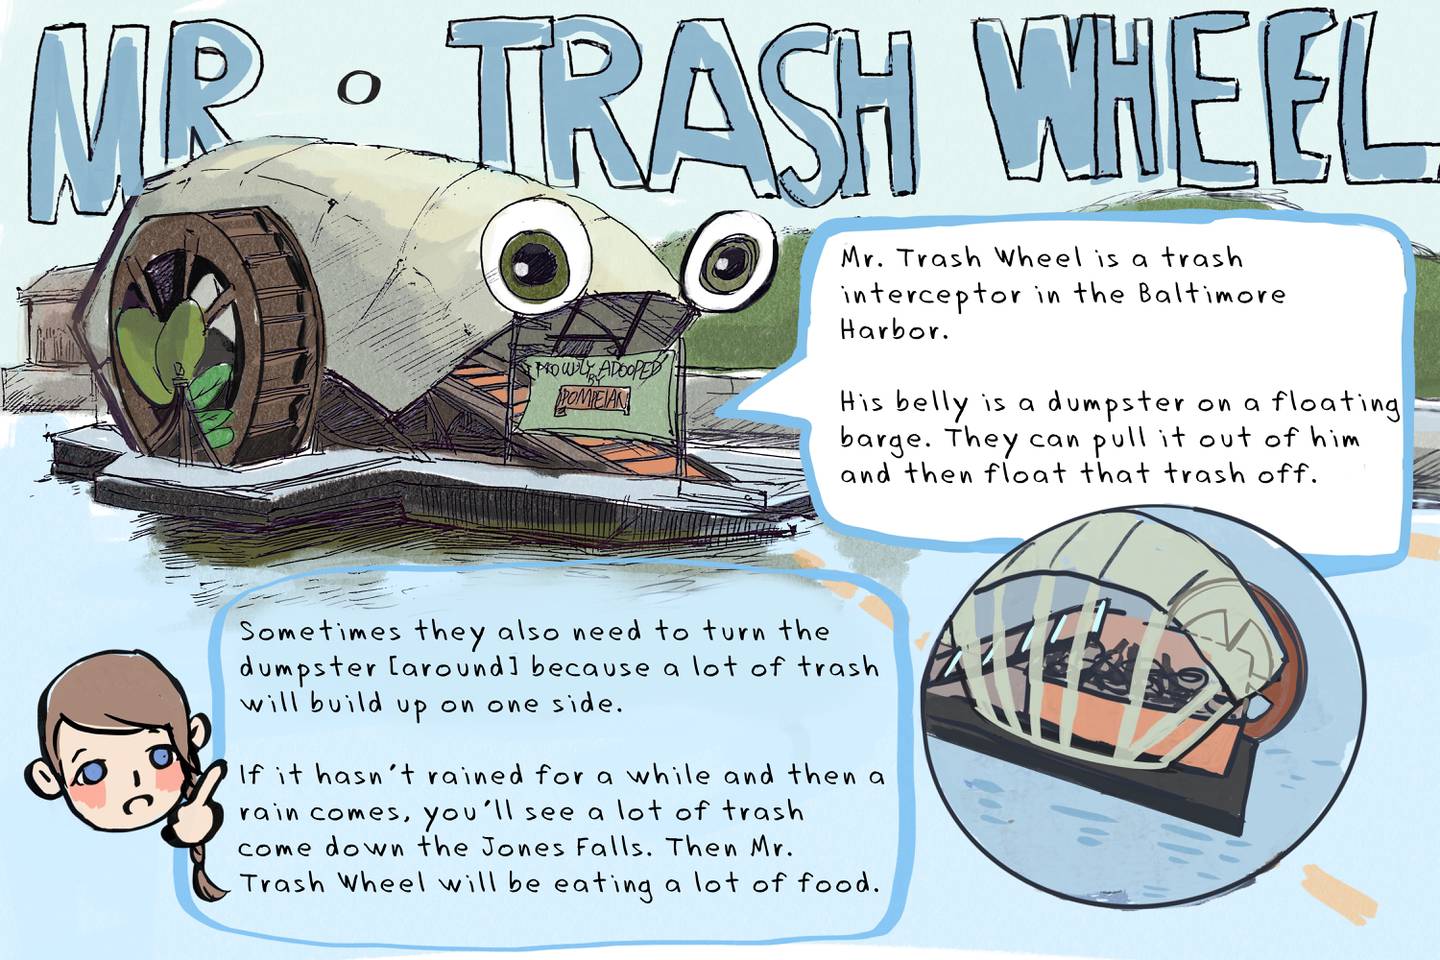 Mr. Trash Wheel is a trash interceptor in the Baltimore Harbor. His belly is a dumpster on a floating barge. They can pull it out of him and then float that trash off. Sometimes they also need to turn the dumpster [around] because a lot of trash will build up on one side. If it hasn't rained for a while and then a rain comes, you'll see a lot of trash come down the Jones Falls. Then Mr. Trash Wheel will be eating a lot of food.